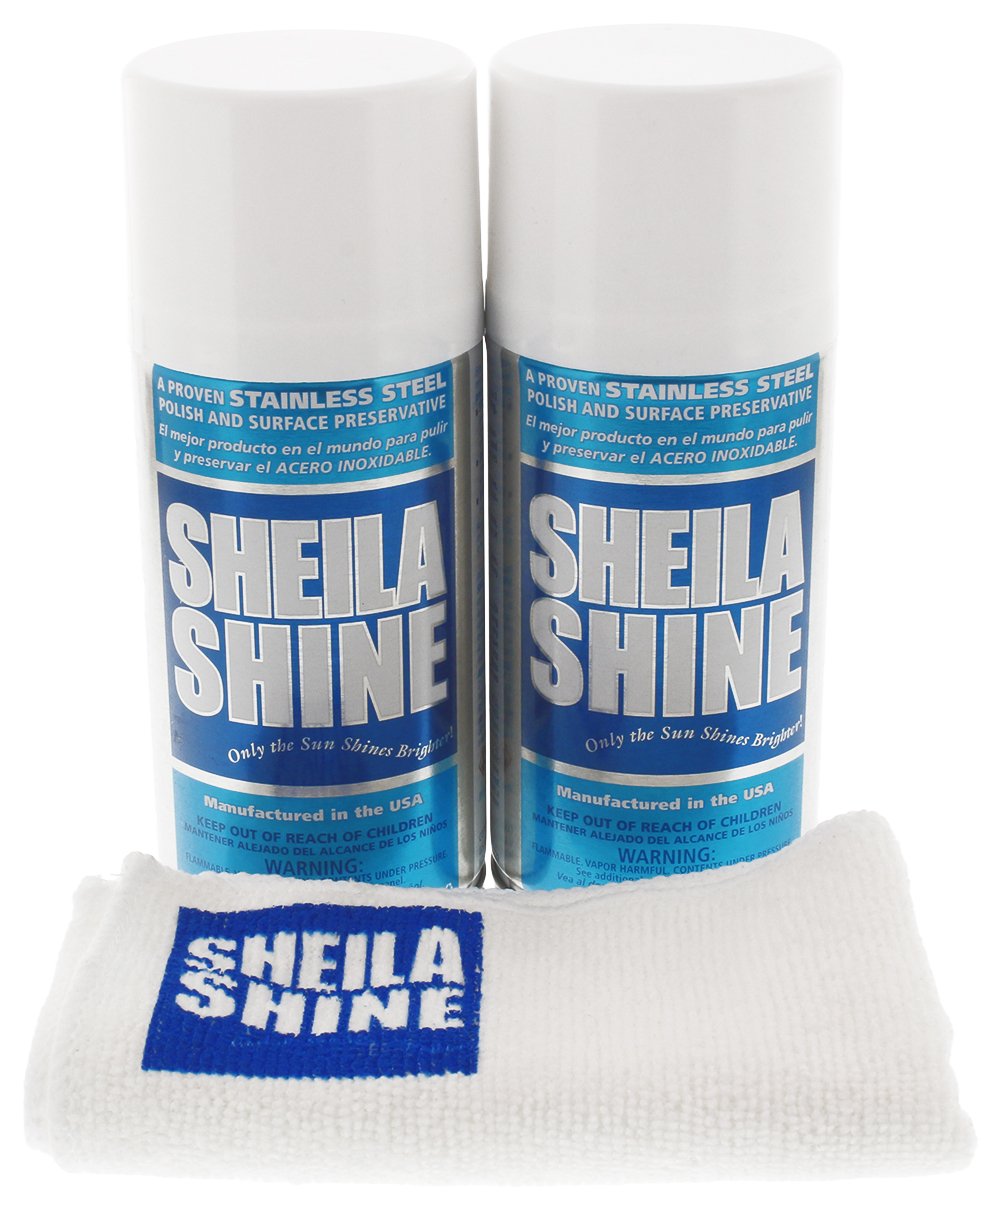 Sheila Shine Stainless Steel Polish & Cleaner | Protects Appliances from  Fingerprints and Grease Marks | Residue & Streak Free | 32 oz Spray Bottle